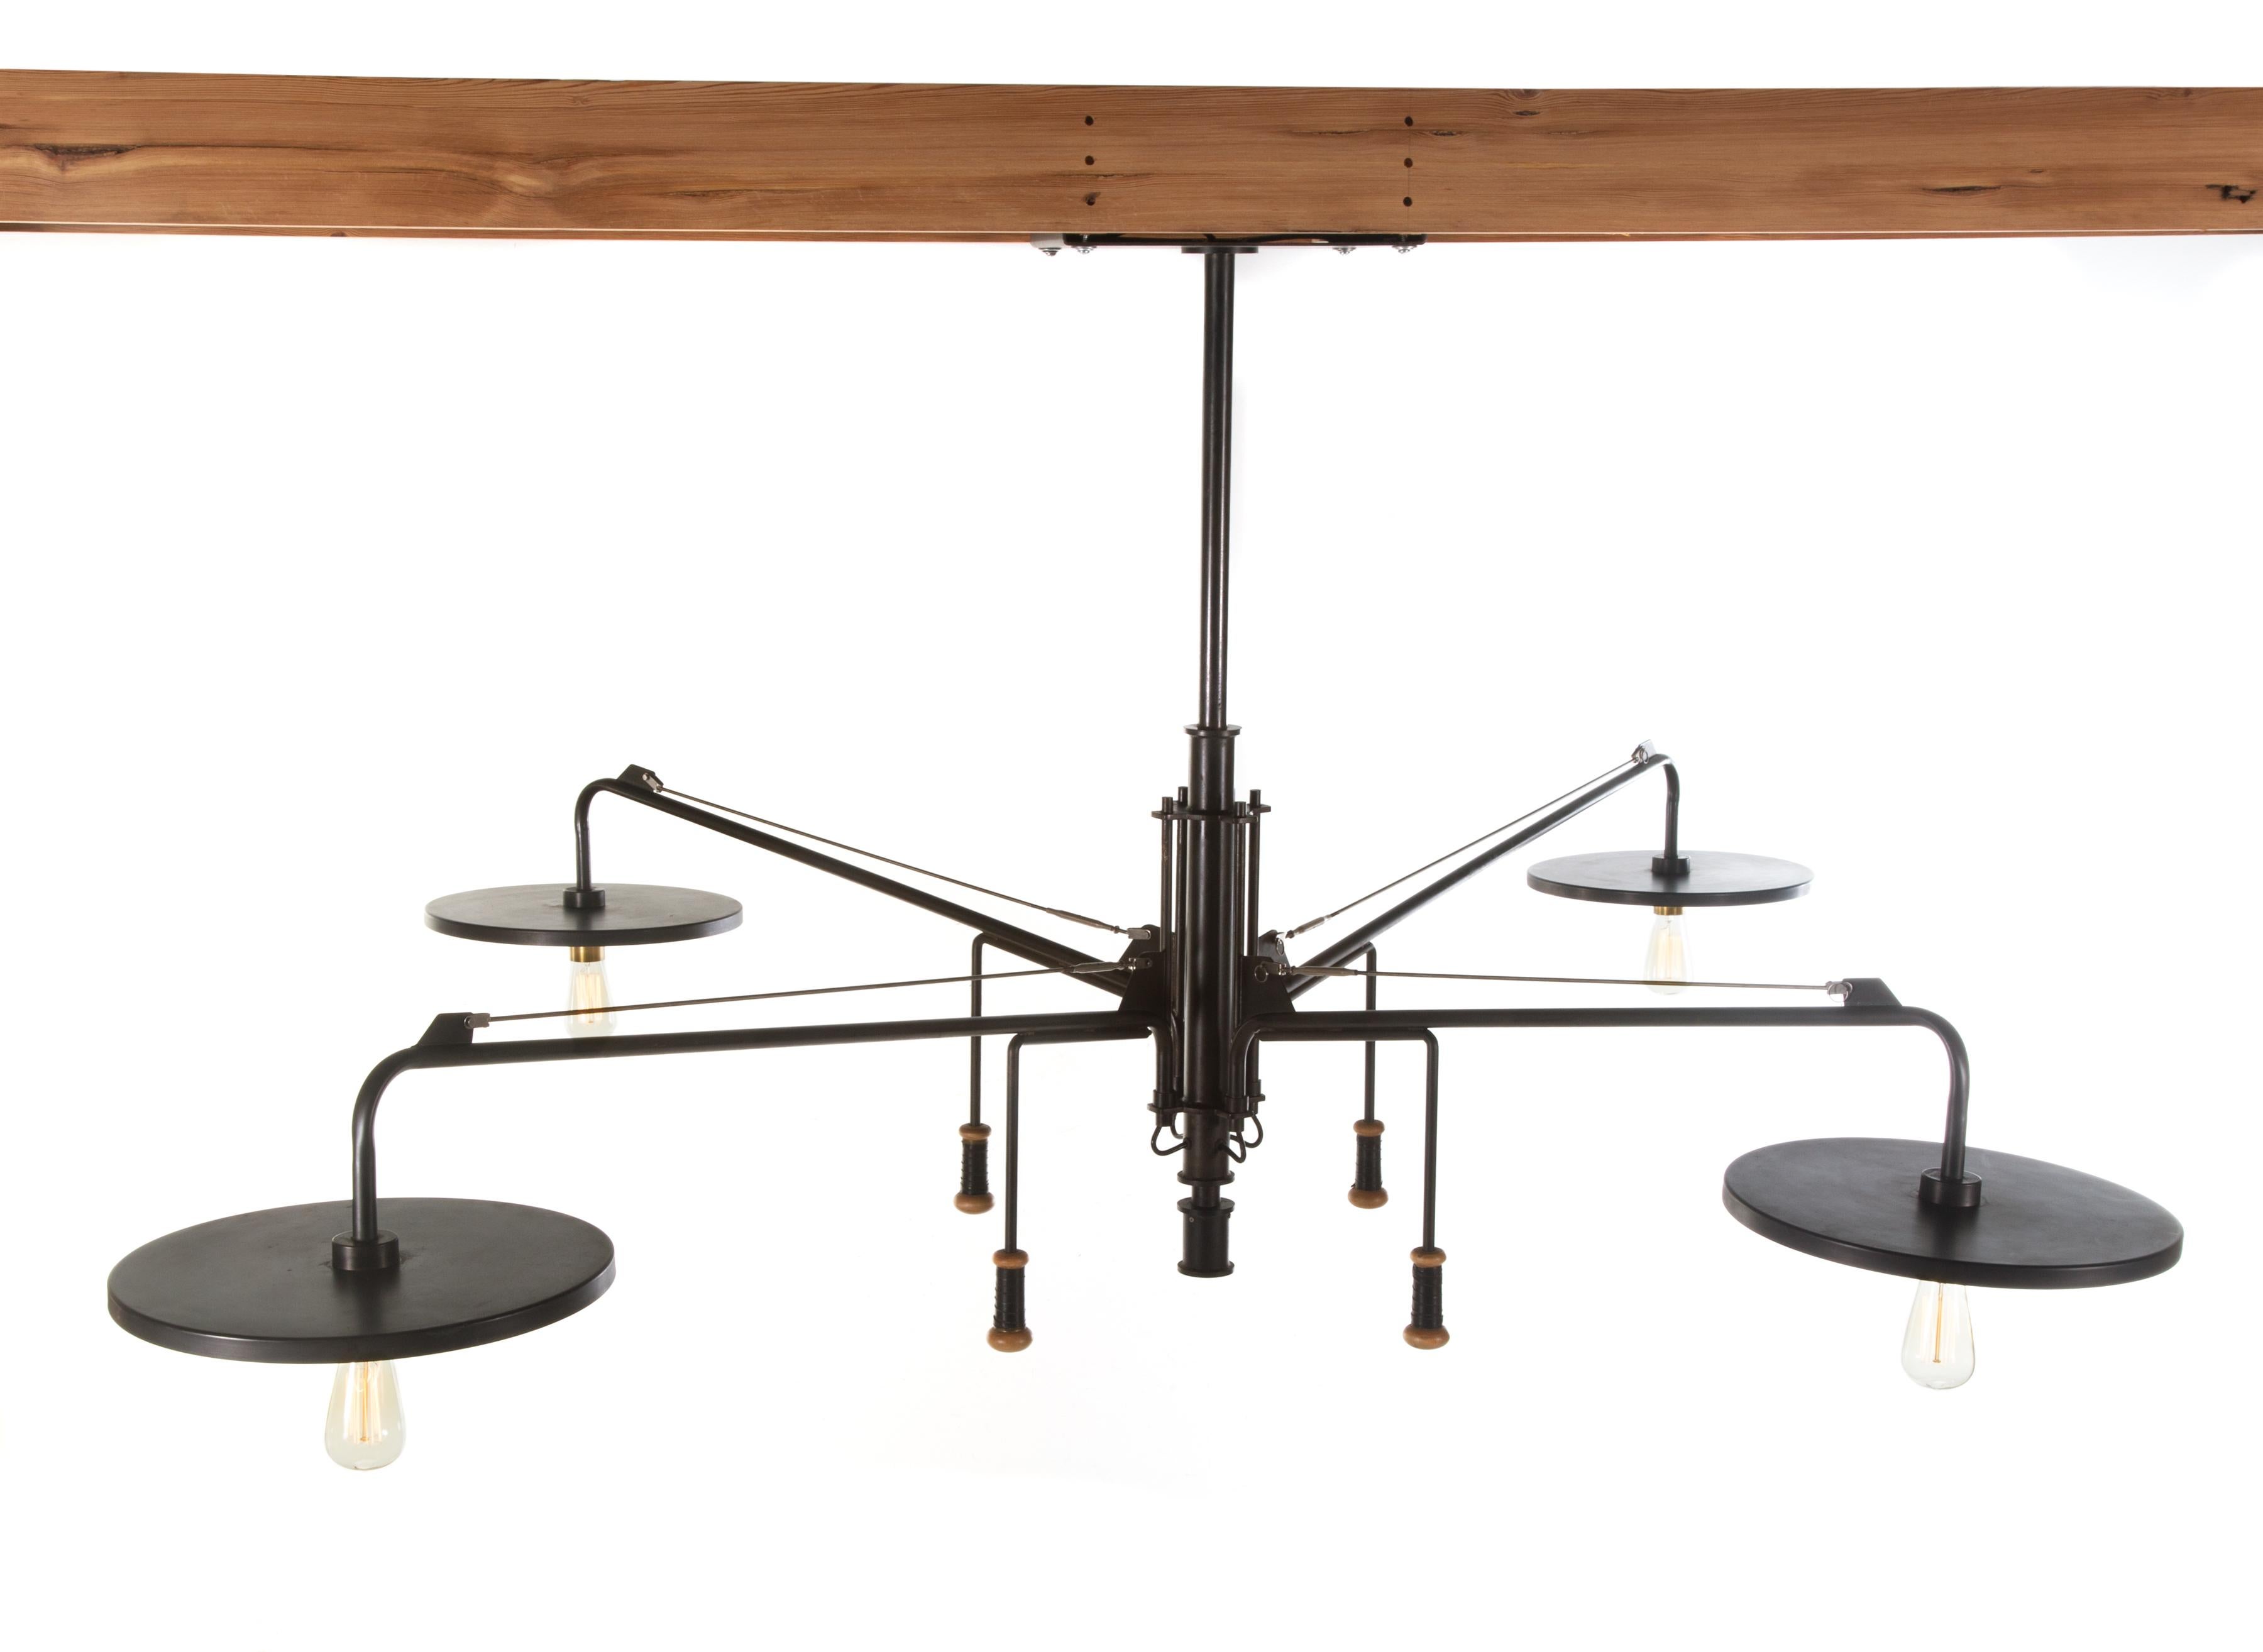 Impressively scaled and adjustable, 4-arm ceiling fixture by Luminaire, circa 1985. Unusual form is probably custom. The arms and fixture body are made of wrought steel with spun brass light diffusers and leather-wrapped, turned maple arm-adjustment